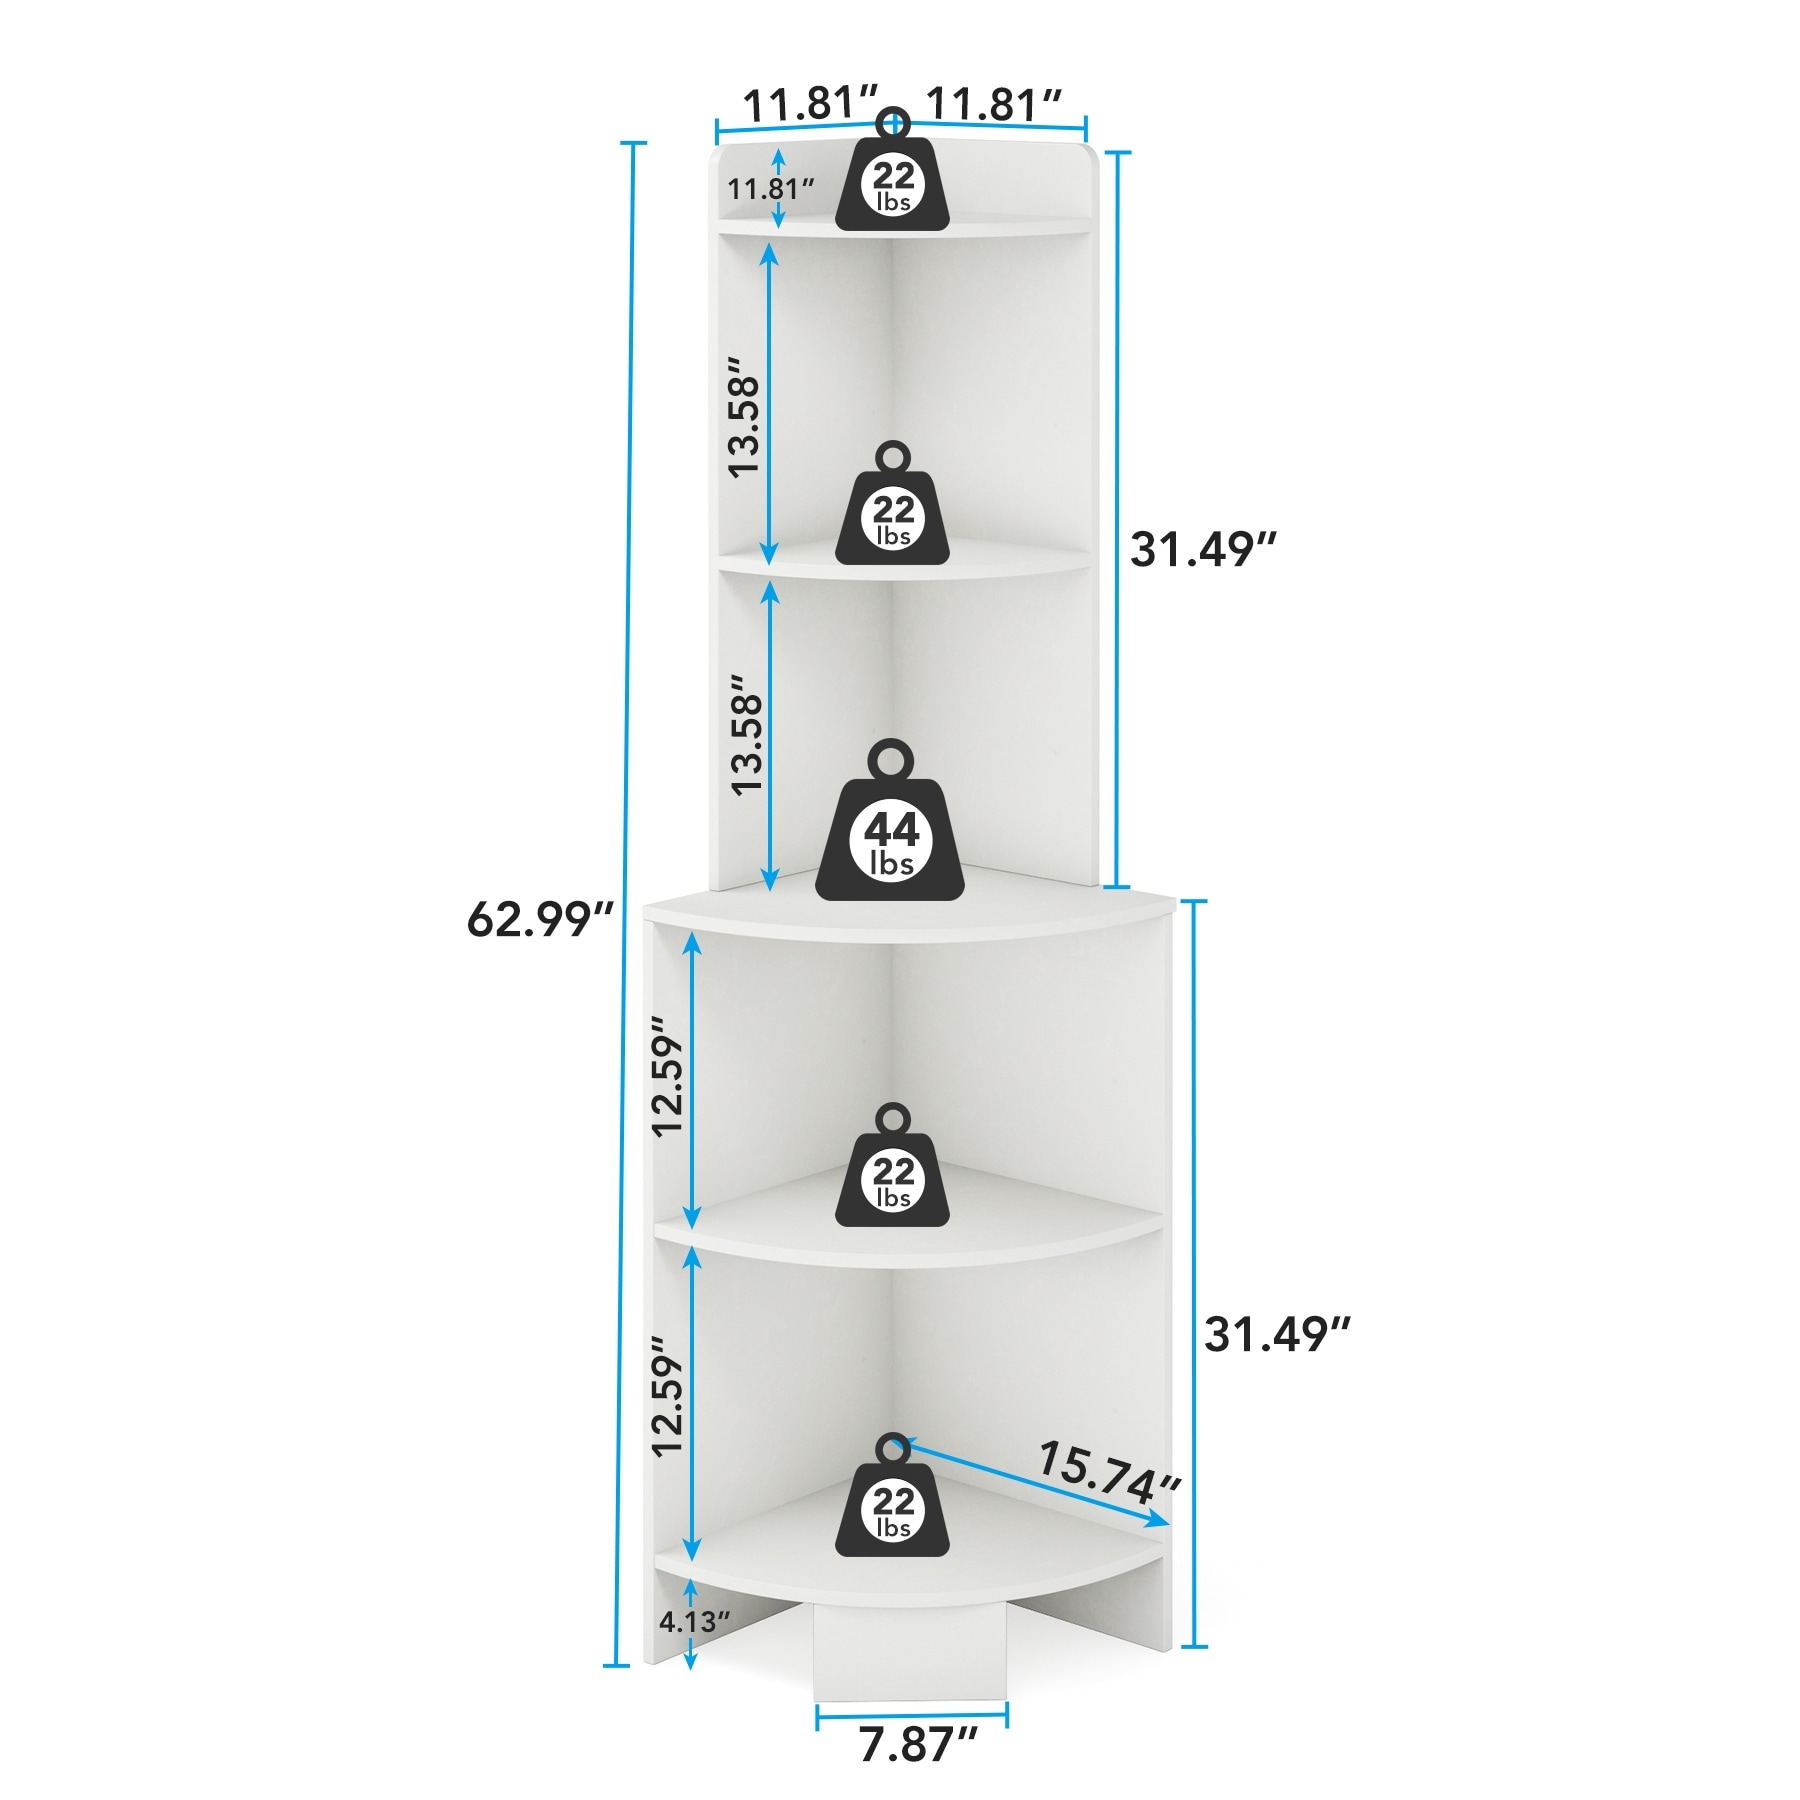 https://ak1.ostkcdn.com/images/products/is/images/direct/f8adb55301900171cee5e2bf2734428eed1f0301/5-Tier-Corner-Shelf%2C-60-Inch-Bookcase-for-Living-Room%2C-Industrial-Corner-Storage-Rack-Plant-Stand-for-Home-Office.jpg